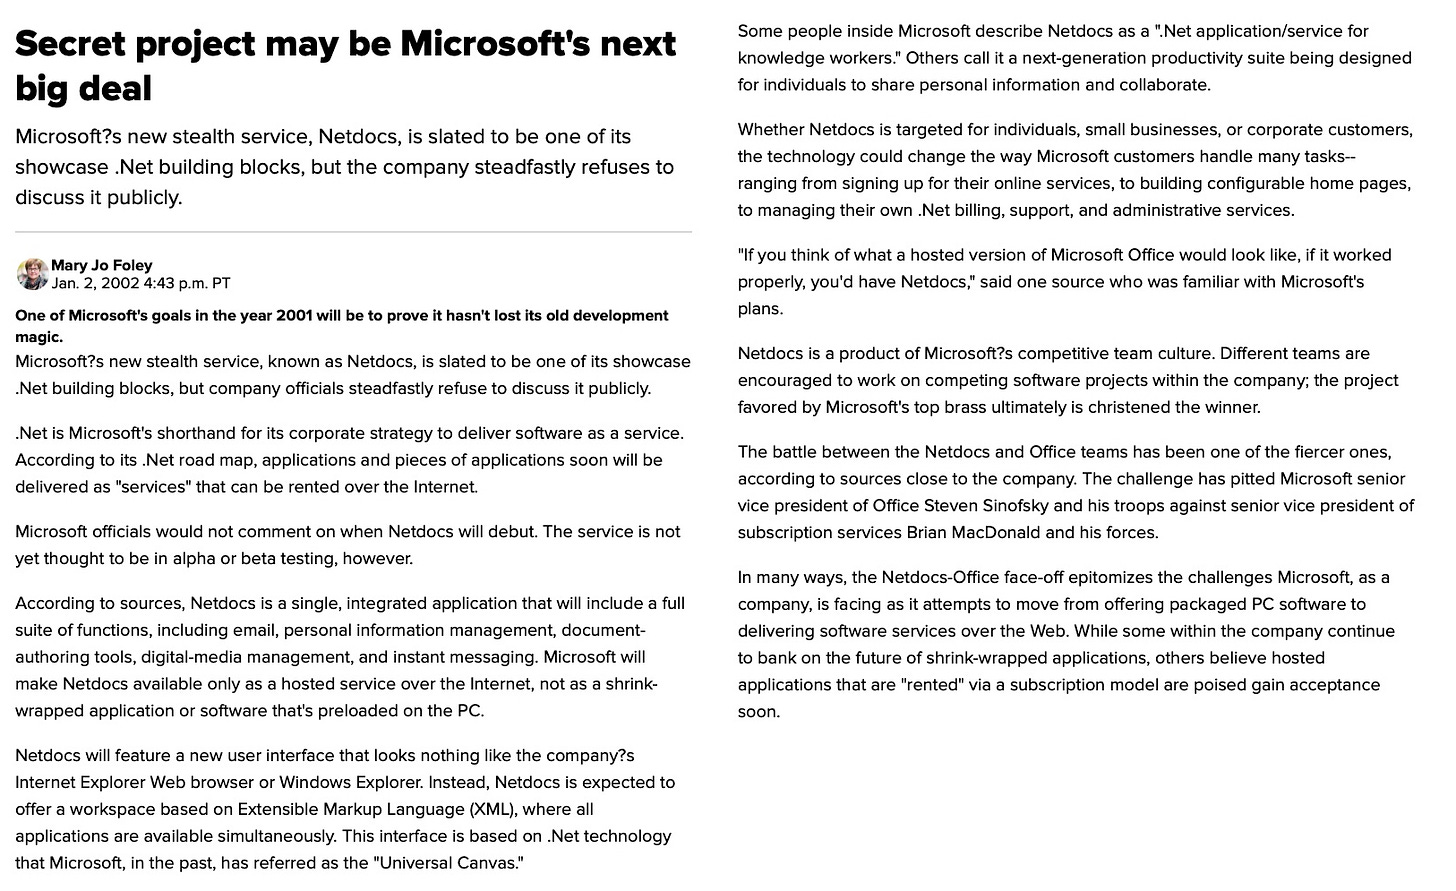 Secret project may be Microsoft's next big deal Microsoft?s new stealth service, Netdocs, is slated to be one of its showcase .Net building blocks, but the company steadfastly refuses to discuss it publicly. Mary Jo Foley 1 Jan. 2, 2002 4:43 p.m. PT One of Microsoft's goals in the year 2001 will be to prove it hasn't lost its old development magic. Microsoft?s new stealth service, known as Netdocs. is slated to be one of its showcase Net building blocks, but company officials steadfastly refuse to discuss it publicly. Net is Microsoft's shorthand for its corporate strategy to deliver software as a service. According to its Net road map, applications and pieces of applications soon will be delivered as "services" that can be rented over the Internet. Microsoft officials would not comment on when Netdocs will debut The service is not yet thought to be in alpha or beta testing, however. According to sources, Netdocs is a single, integrated application that will include a full suite of functions, including email, personal information management, document- authoring tools, digital-media management, and instant messaging. Microsoft will make Netdocs available only as a hosted service over the Internet, not as a shrink- wrapped application or software that's preloaded on the PC. Netdocs will feature a new user interface that looks nothing like the company?s Internet Explorer Web browser or Windows Explorer. Instead. Netdocs is expected to offer a workspace based on Extensible Markup Language (XML), where all applications are available simultaneously. This interface is based on .Net technoloav that Microsoft, in the past, has referred as the "Universal Canvas." Some people inside Microsoft describe Netdocs as a "Net application/service for knowledge workers." Others call it a next-generation productivity suite being designed for individuals to share personal information and collaborate. Whether Netdocs is targeted for individuals, small businesses, or corporate customers, the technology could change the way Microsoft customers handle many tasks- ranging from signing up for their online services, to building configurable home pages, to managing their own .Net billing, support, and administrative services. "If you think of what a hosted version of Microsoft Office would look like, if it worked properly, you'd have Netdocs," said one source who was familiar with Microsoft's plans. Netdocs is a product of Microsoft? competitive team culture. Different teams are encouraged to work on competing software projects within the company; the project favored by Microsoft's top brass ultimately is christened the winner. The battle between the Netdocs and Office teams has been one of the fiercer ones. according to sources close to the company. The challenge has pitted Microsoft senior vice president of Office Steven Sinofsky and his troops against senior vice president of subscription services Brian McDonald and his forces. In many ways, the Netdocs-Office face-off epitomizes the challenges Microsoft, as a company, is facing as it attempts to move from offering packaged PC software to delivering software services over the Web. While some within the company continue to bank on the future of shrink-wrapped applications, others believe hosted applications that are "rented" via a subscription model are poised gain acceptance soon.